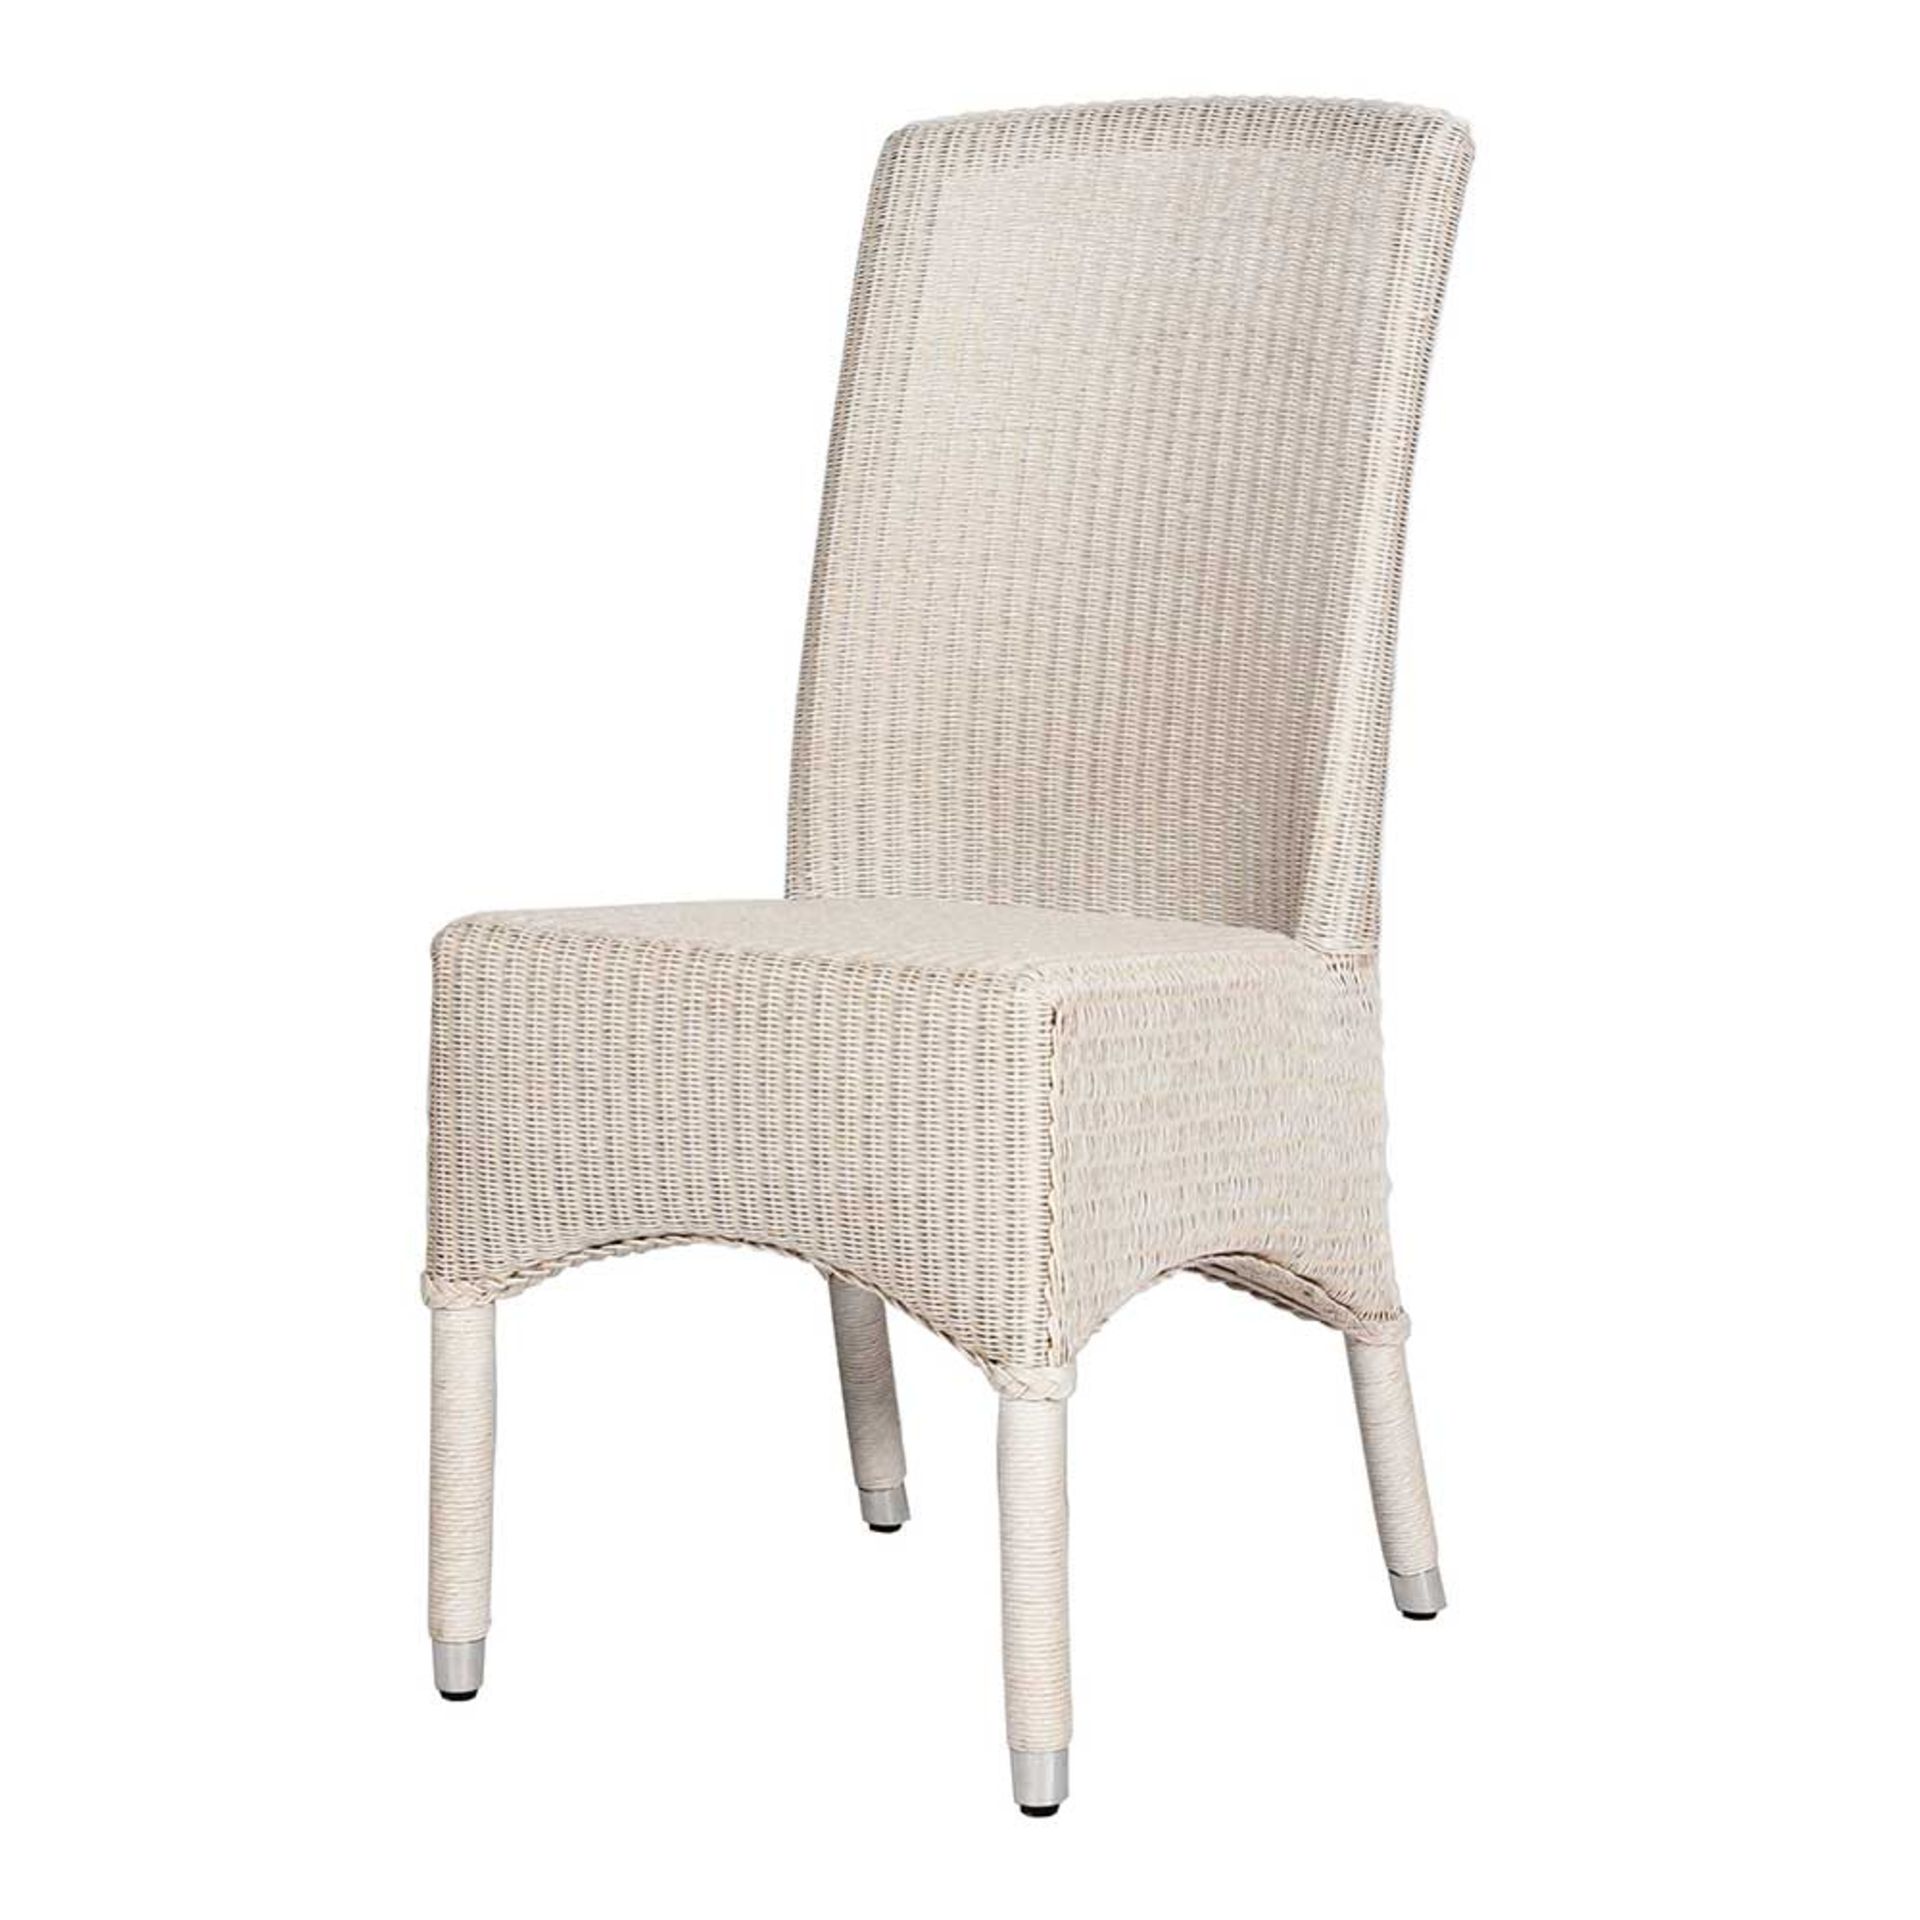 1 x Lloyd Loom Originals Sofia Woven Chair With Cotton Finish - RRP £198!